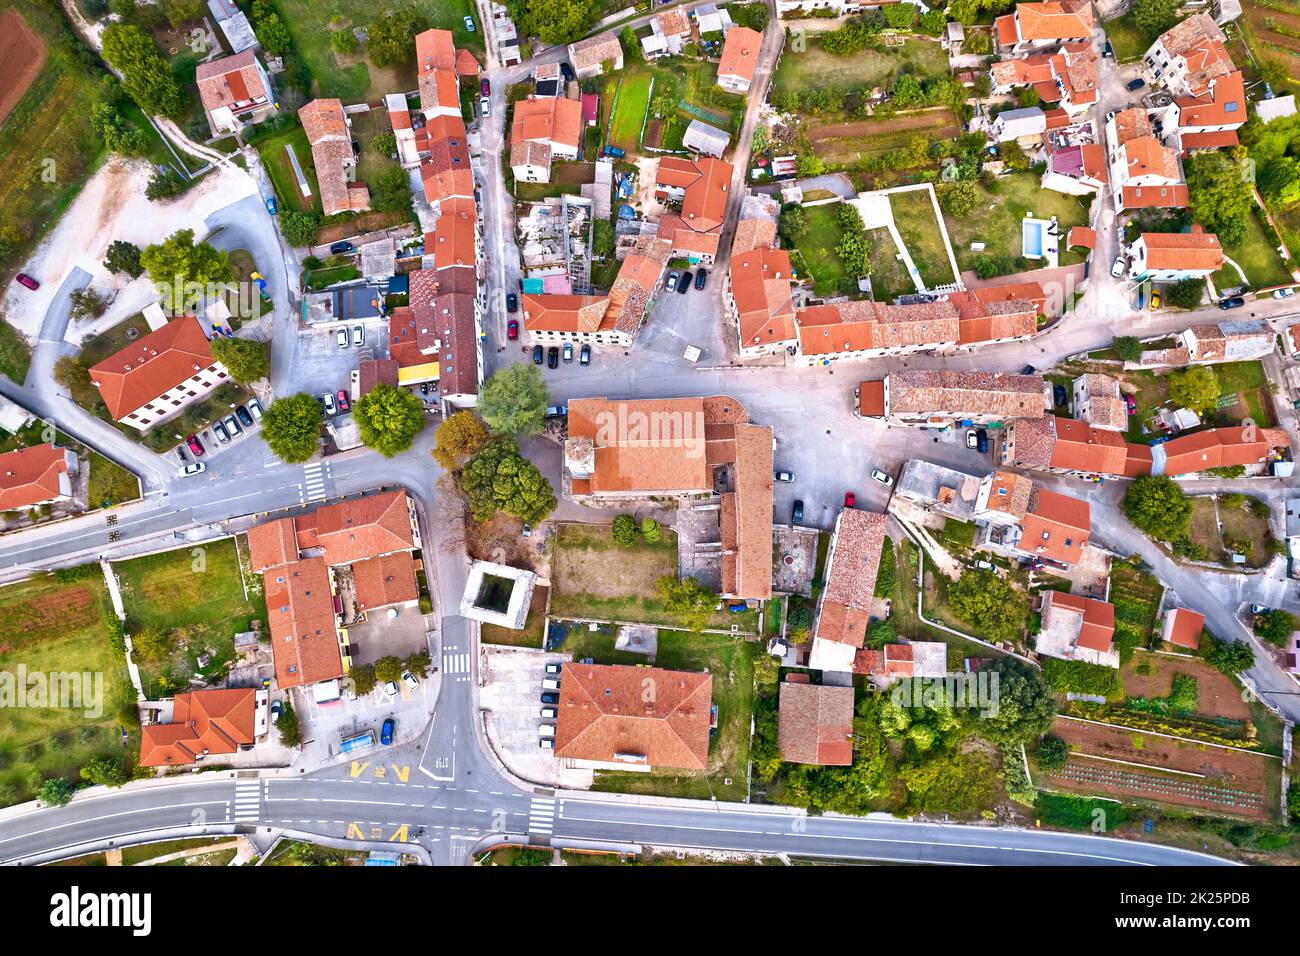 Town of Barban on picturesque Istrian hill aerial view Stock Photo